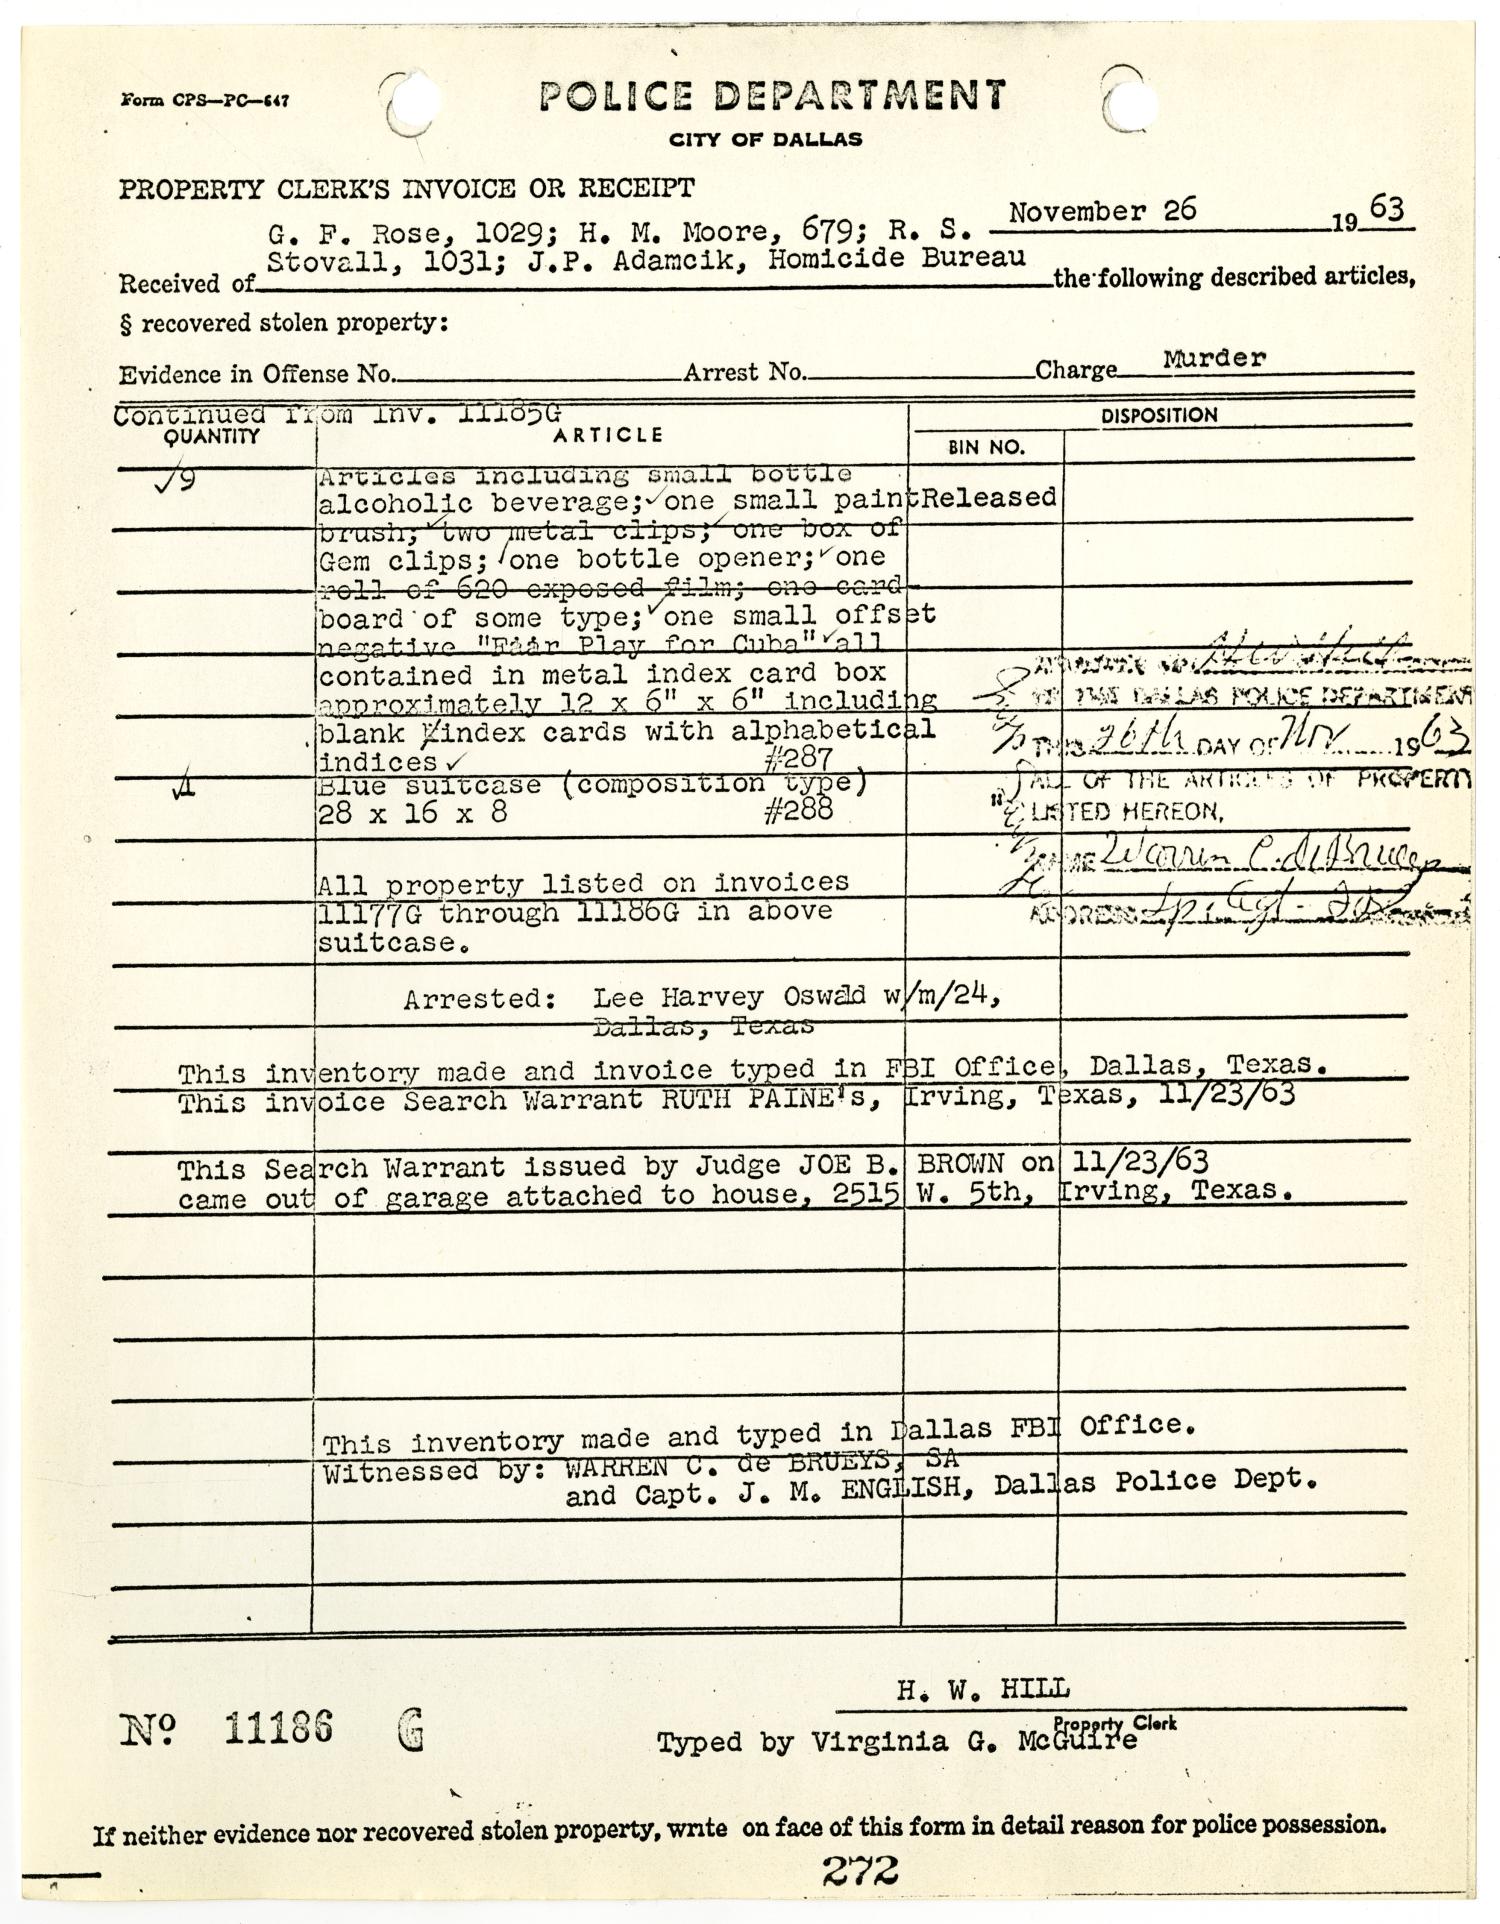 property-clerk-s-invoice-or-receipt-for-property-belonging-to-lee-harvey-oswald-by-h-w-hill